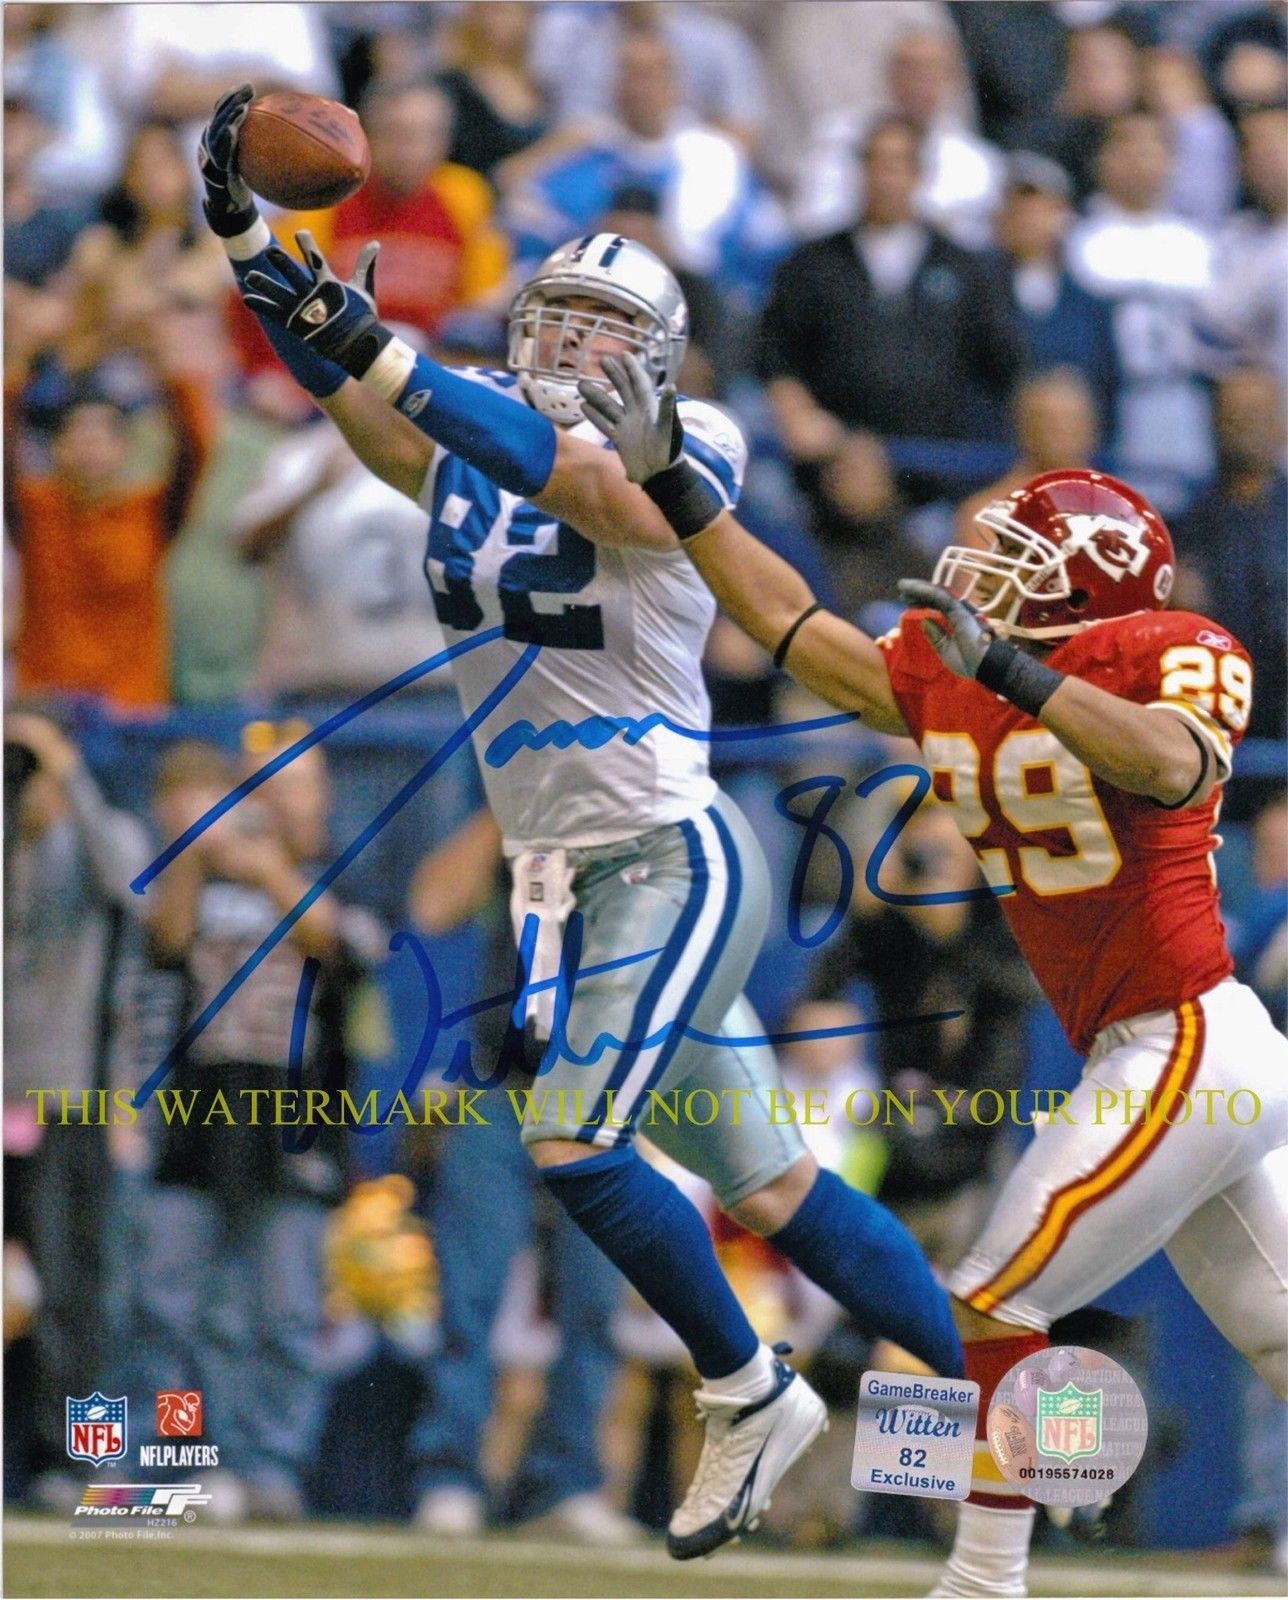 Primary image for JASON WITTEN AUTOGRAPHED AUTO 8x10 RP PHOTO DALLAS COWBOYS AWESOME RECEIVER